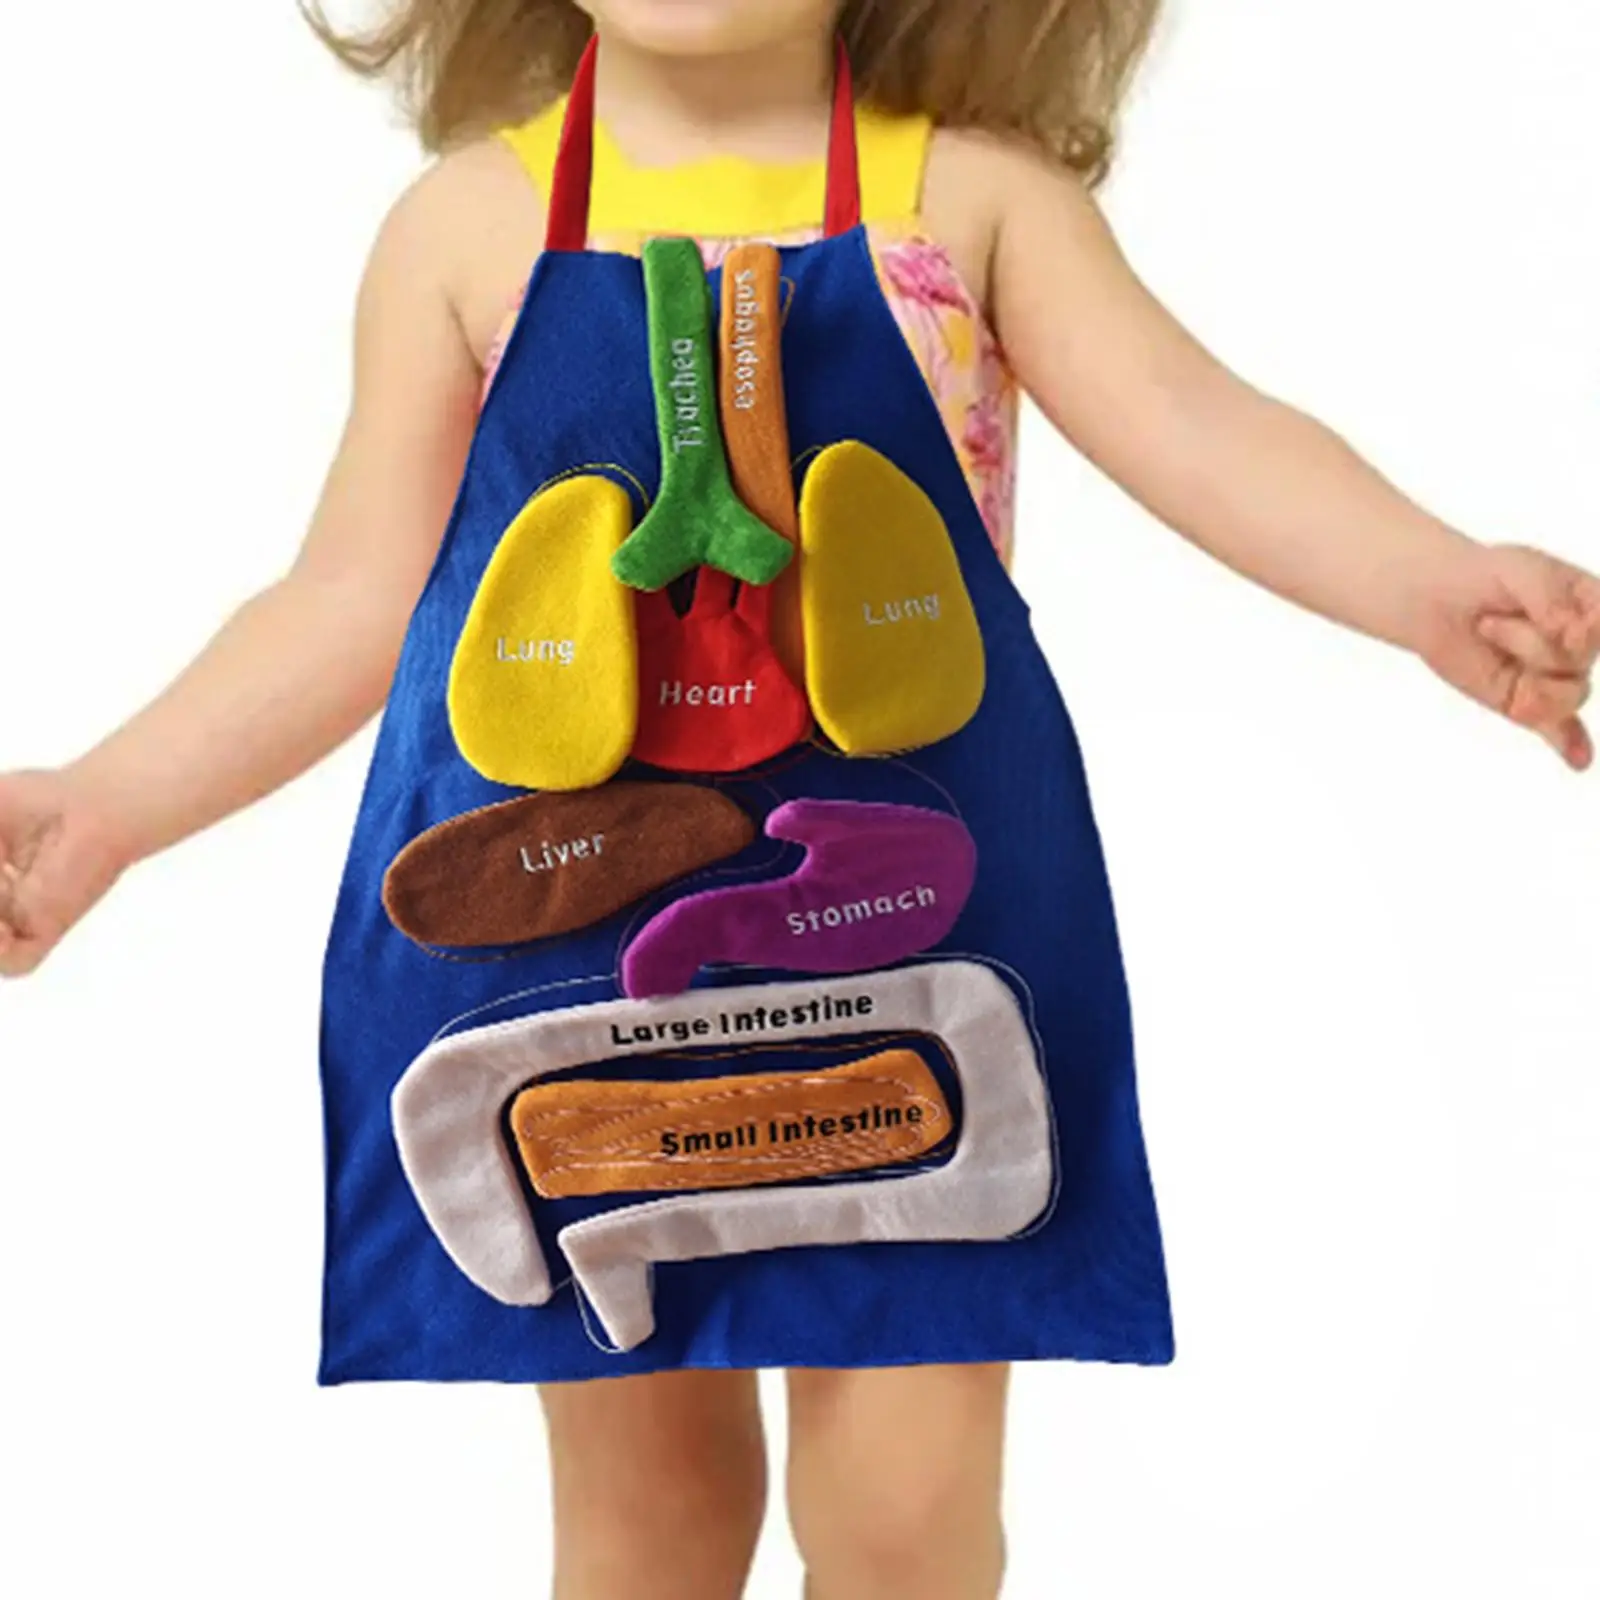 3D Organ Apron Awareness Early Childhood Education Science for Body Parts